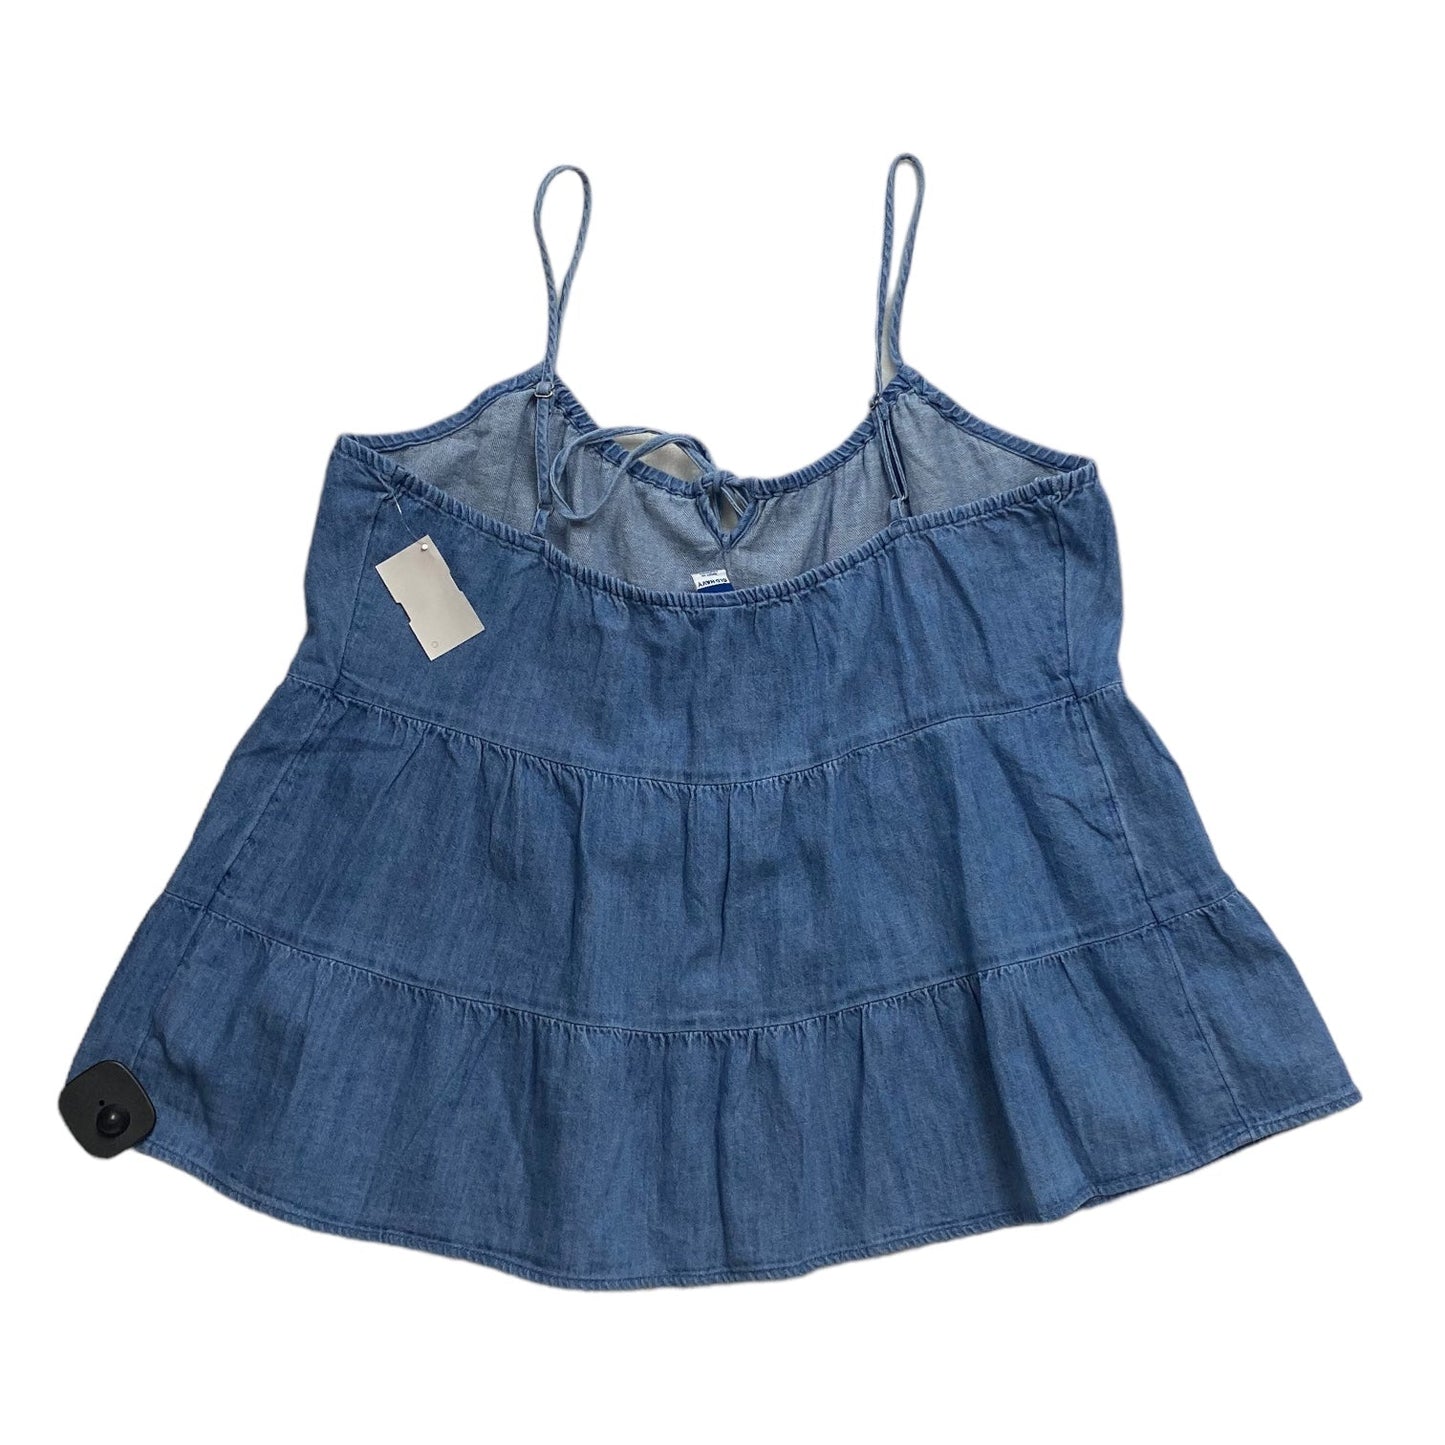 Blue Top Sleeveless Old Navy, Size M